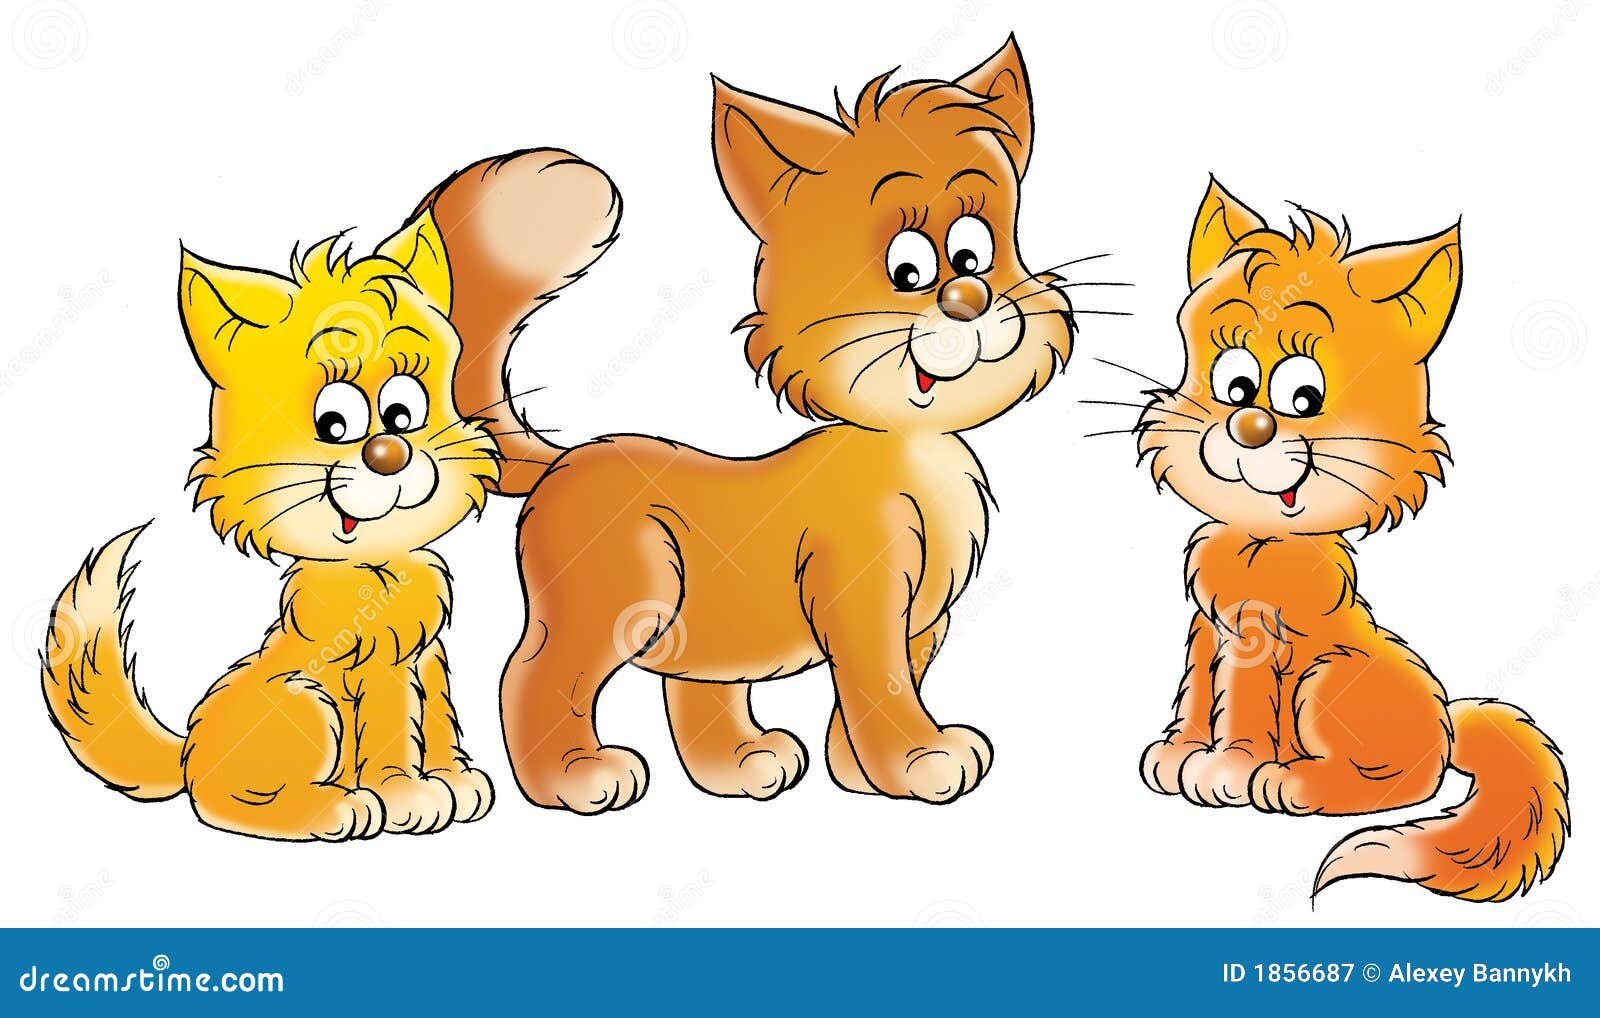 clipart cats and kittens - photo #18